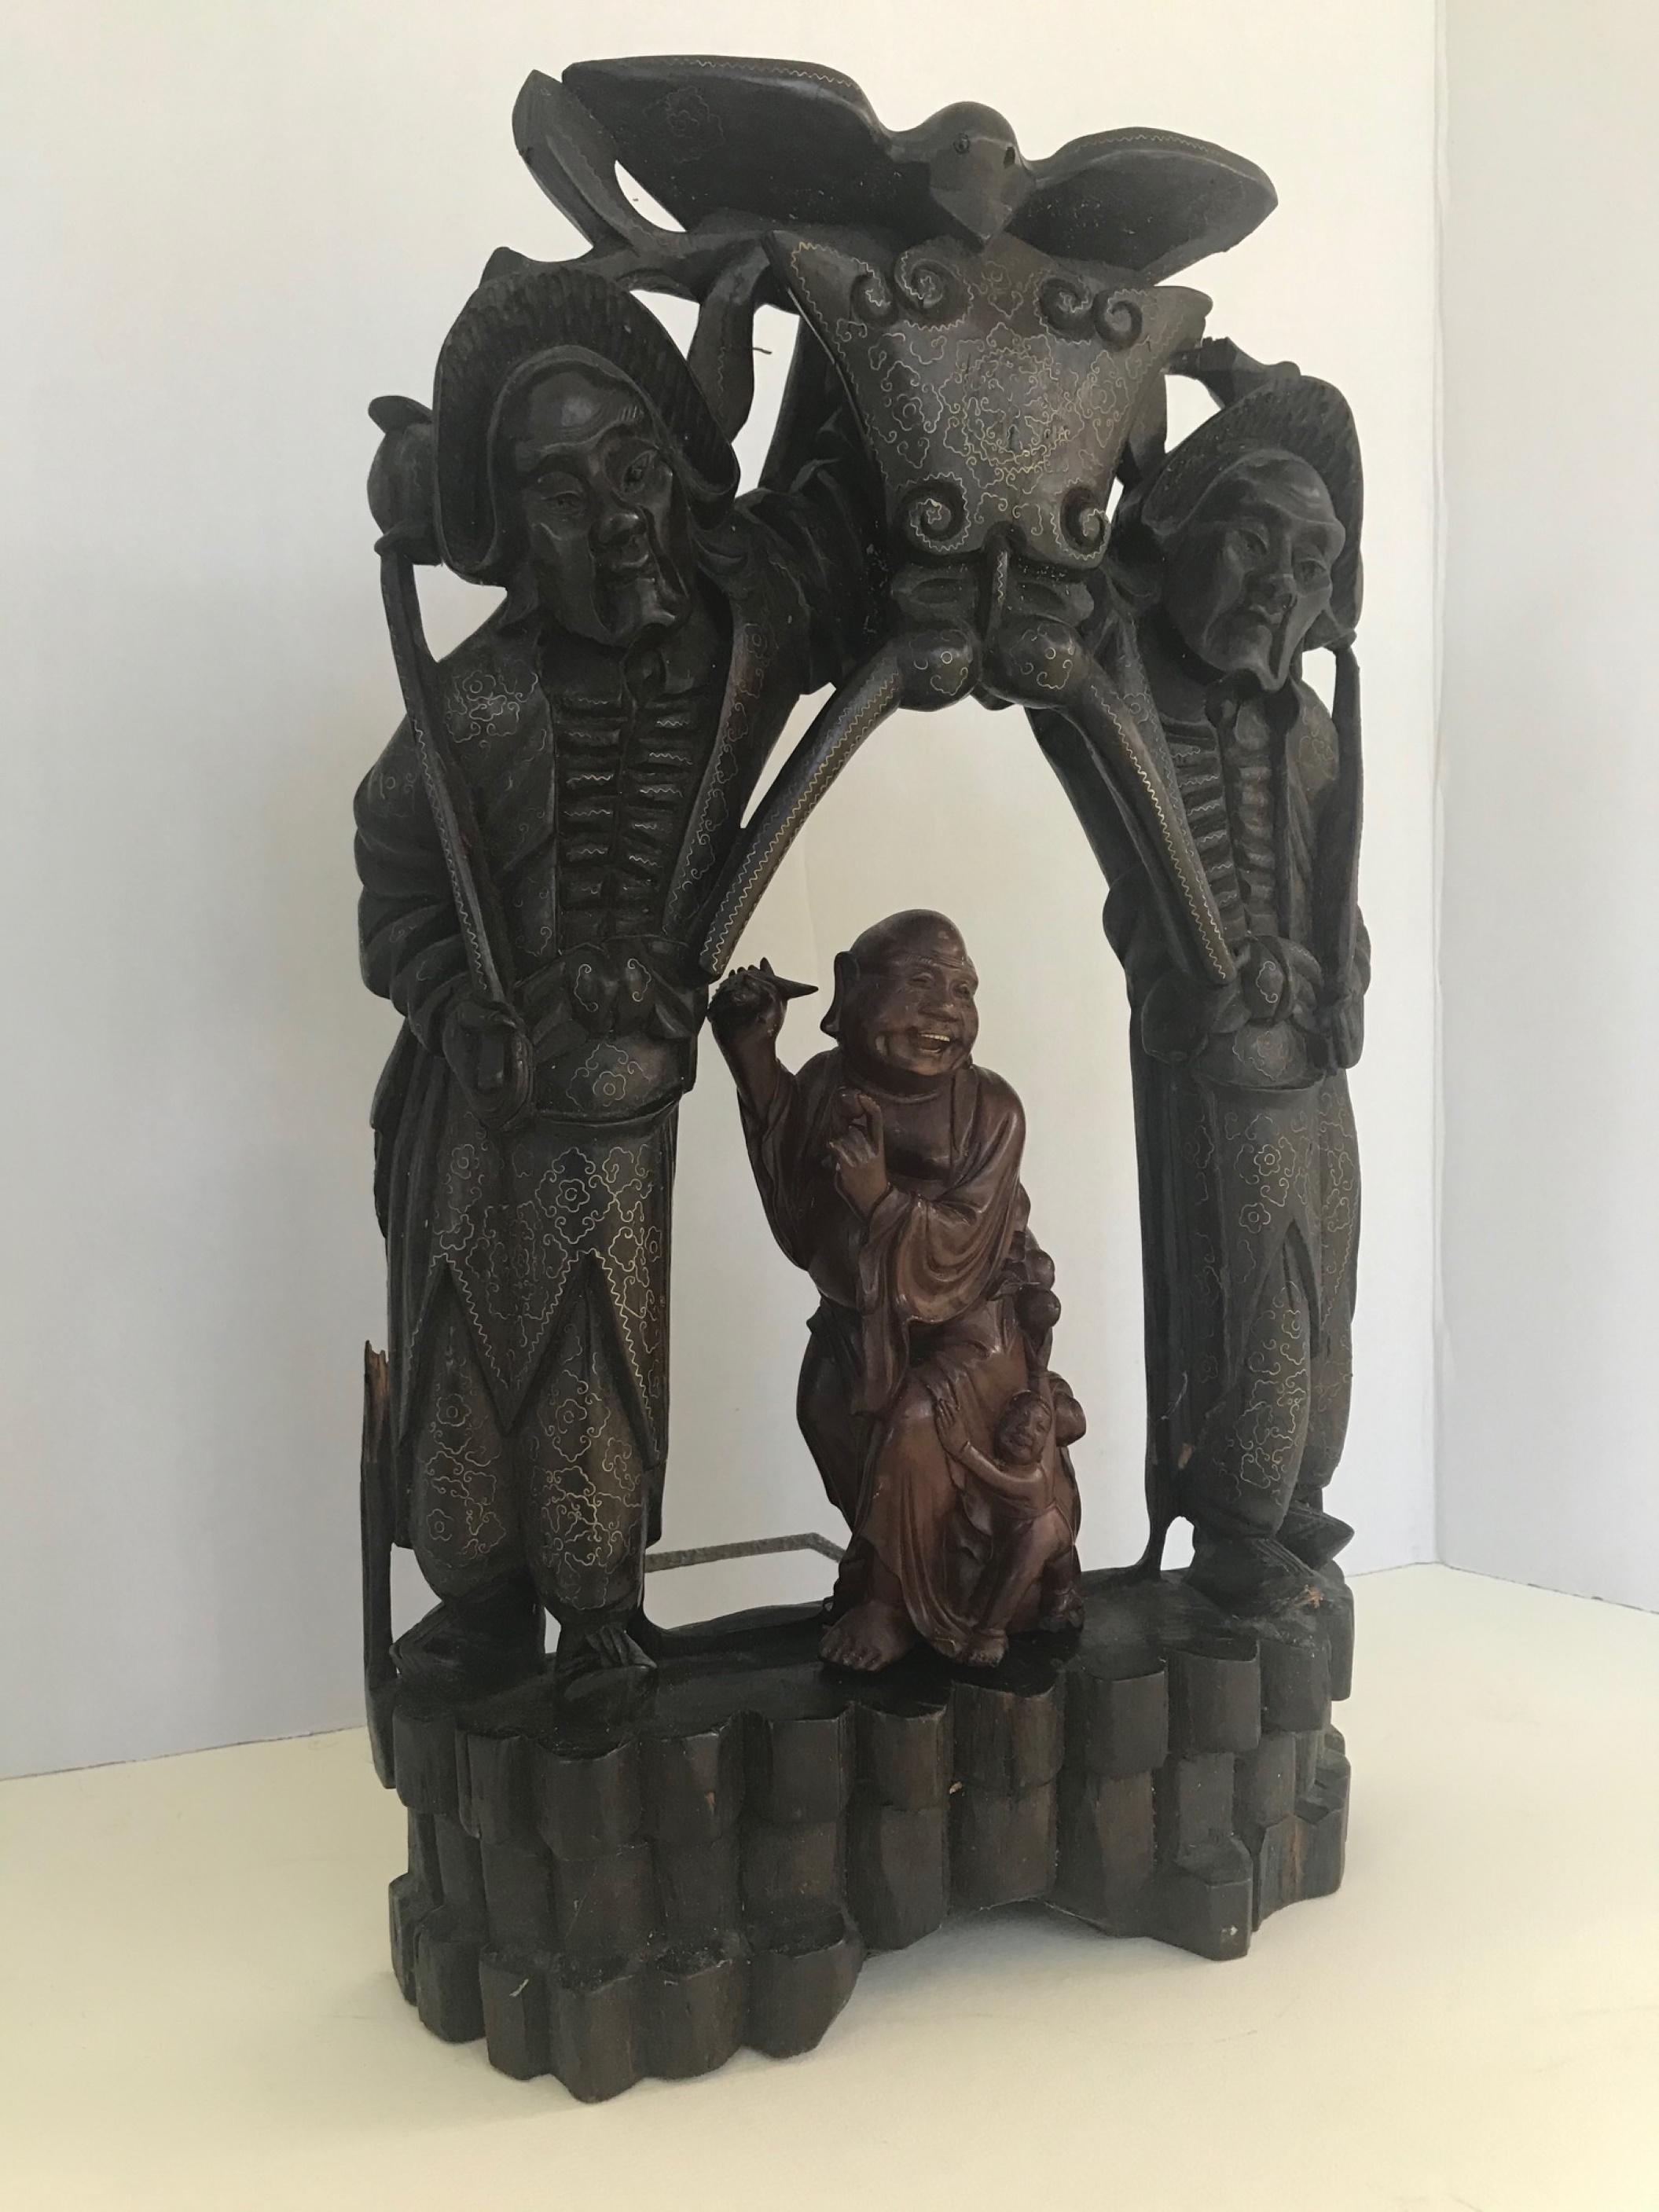 Qing Dynasty Chinese Buddhist wood carved portable shrine.

Imperial Qing Dynasty Chinese intricately openwork carved altar shrine. It is hand
carved in hardwood and depicts two strong sword carrying guardians with glass eyes standing watch in